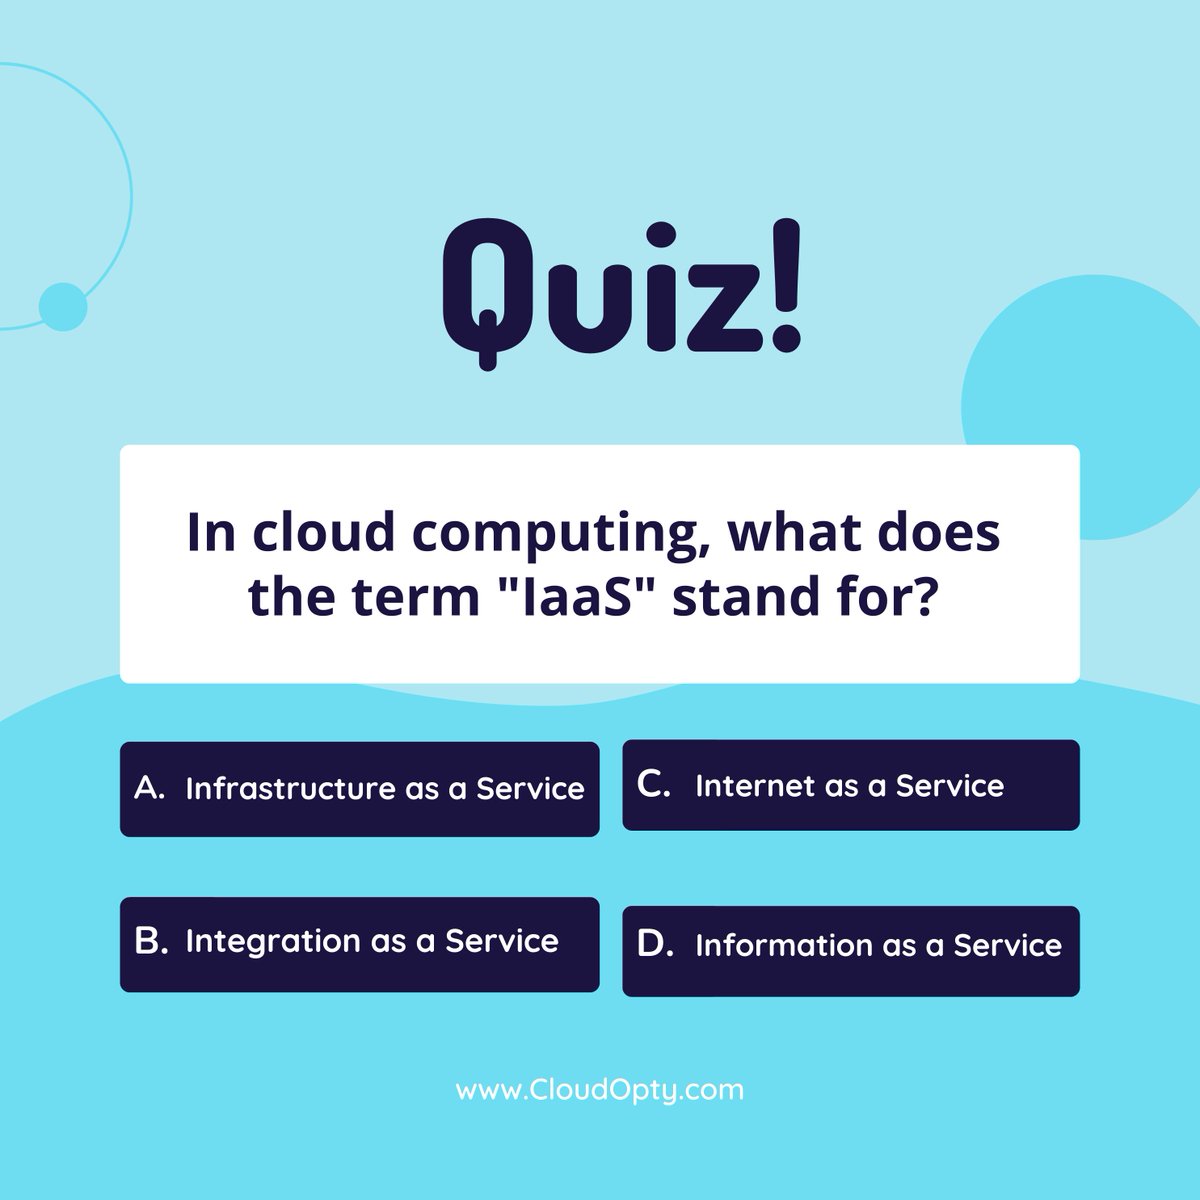 📷Can you answer the questions correctly? In cloud computing, what does the term 'IaaS' stand for? #QuizTime #BrainTeasers #TestYourKnowledge #compliance #cloudcomputing #cloudsecurity #cloudoptimization #cloudcomputingservices #cloudhealth #dailypost #poll #cloudcost